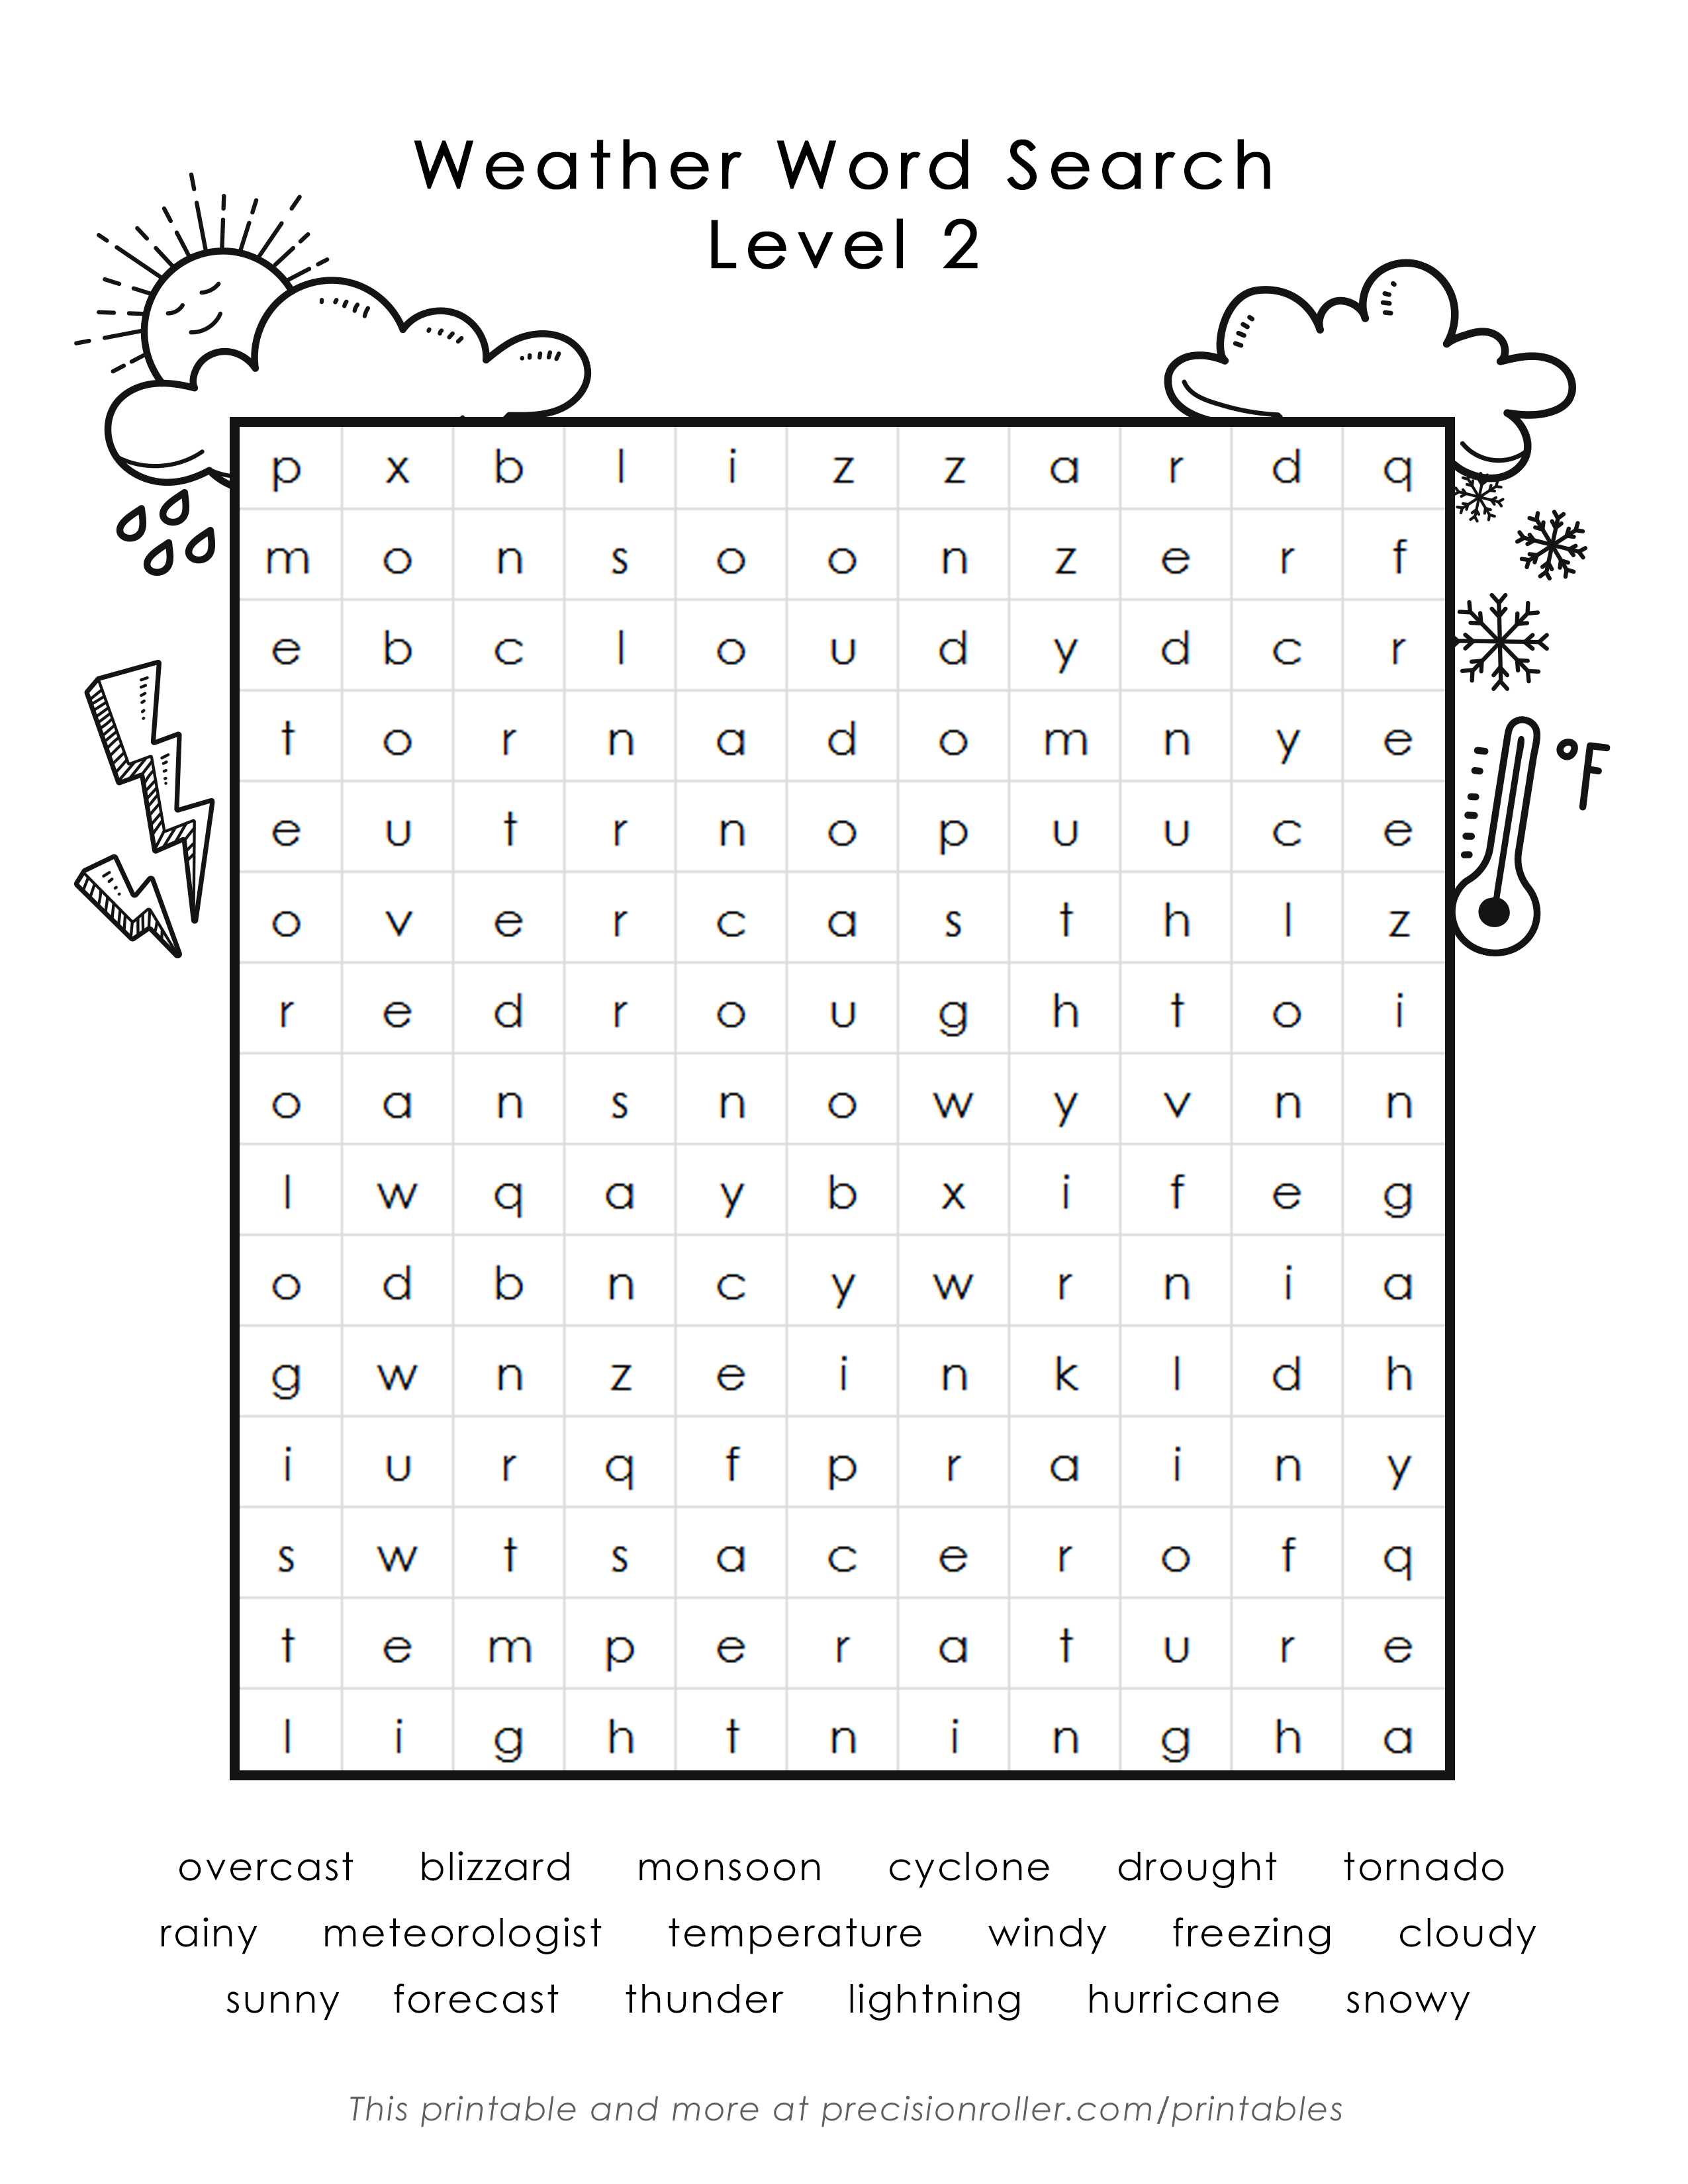 easy-weather-word-search-printable